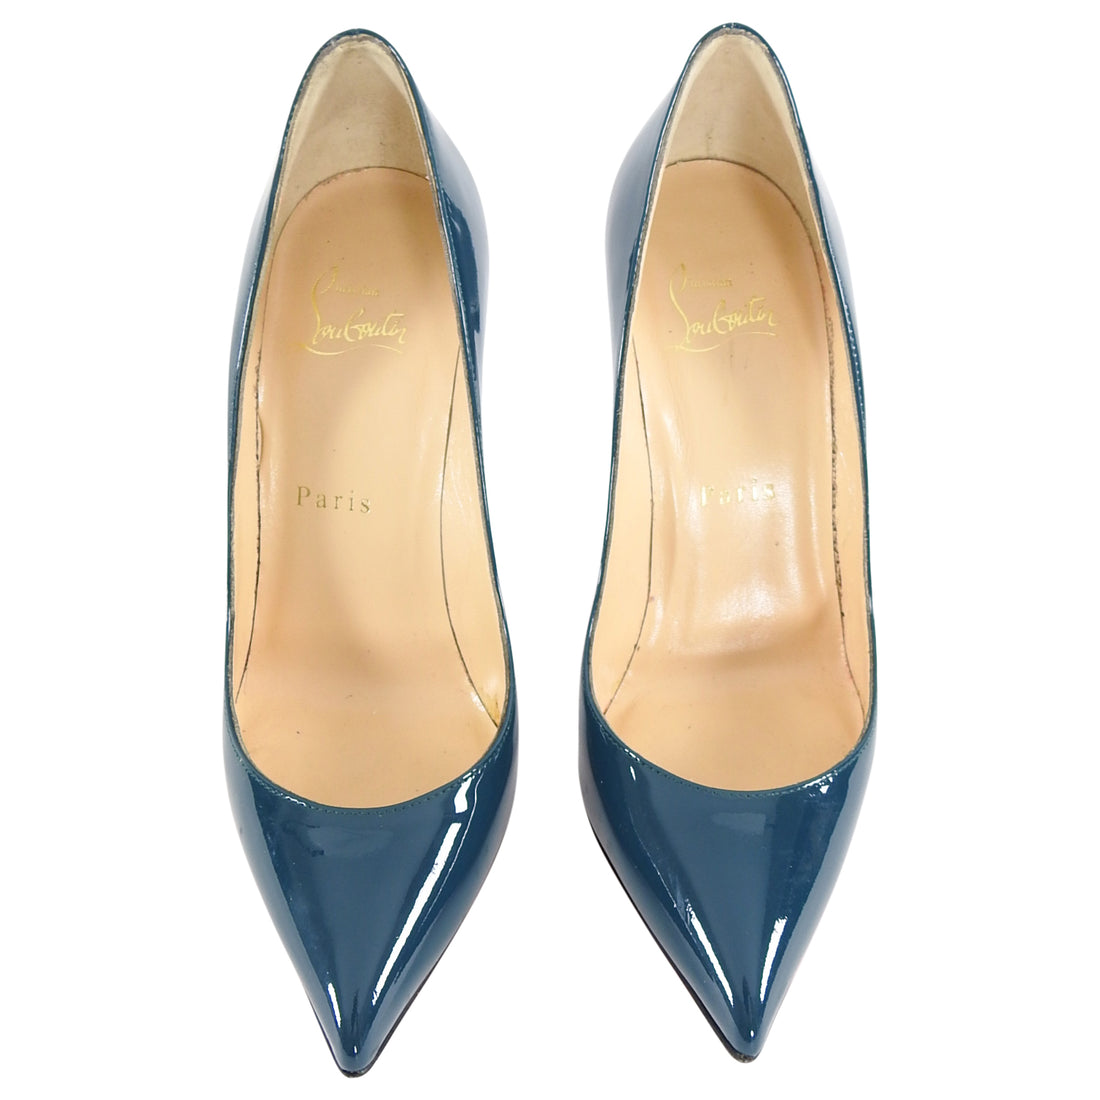 Christian Louboutin Pigalle Follies 100 Teal Patent Pumps - 36